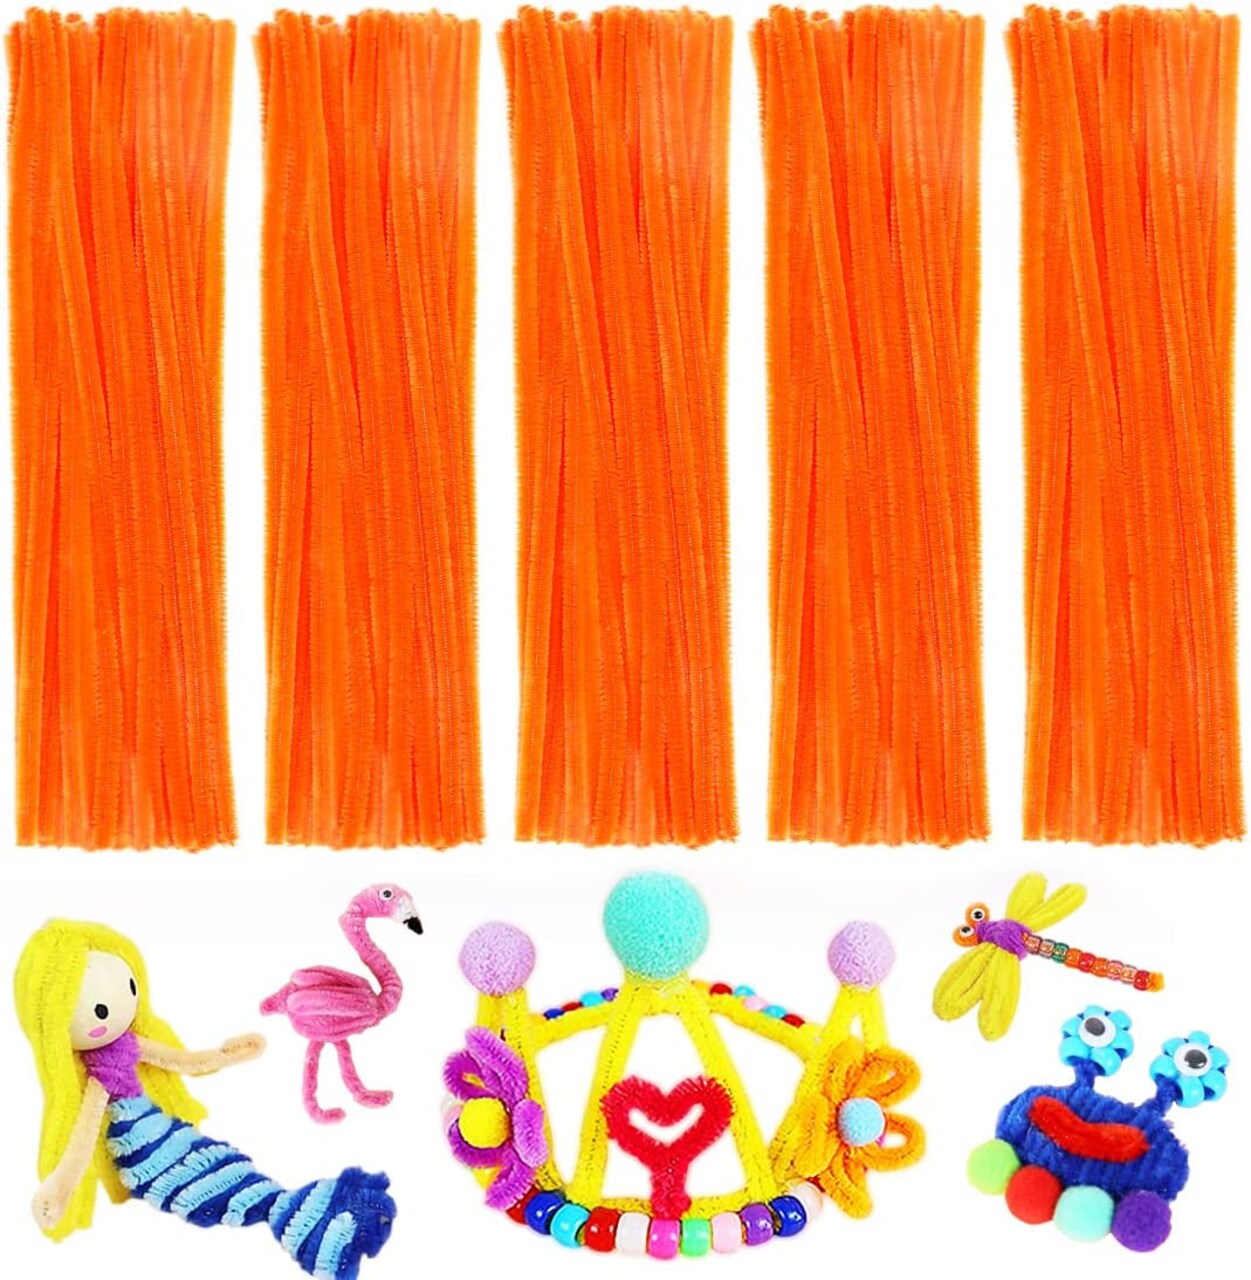 Pipe Cleaners, Pipe Cleaners Craft, Arts and Crafts, Crafts, Craft Supplies,  Art Supplies (200 Multi-Color Pipe Cleaners)